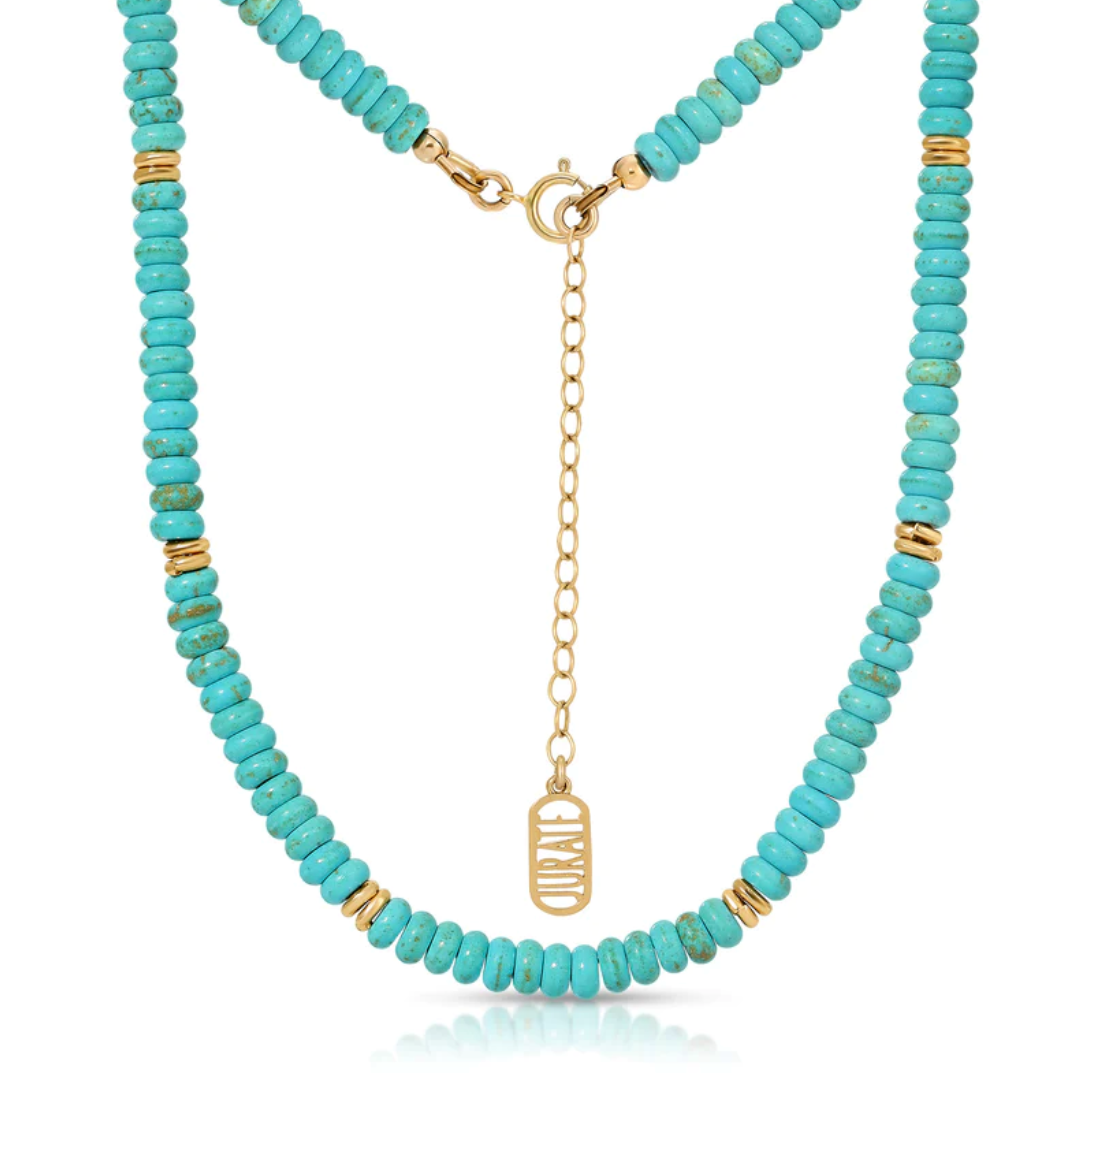 It’s A Mood Beaded Necklace, Turquoise